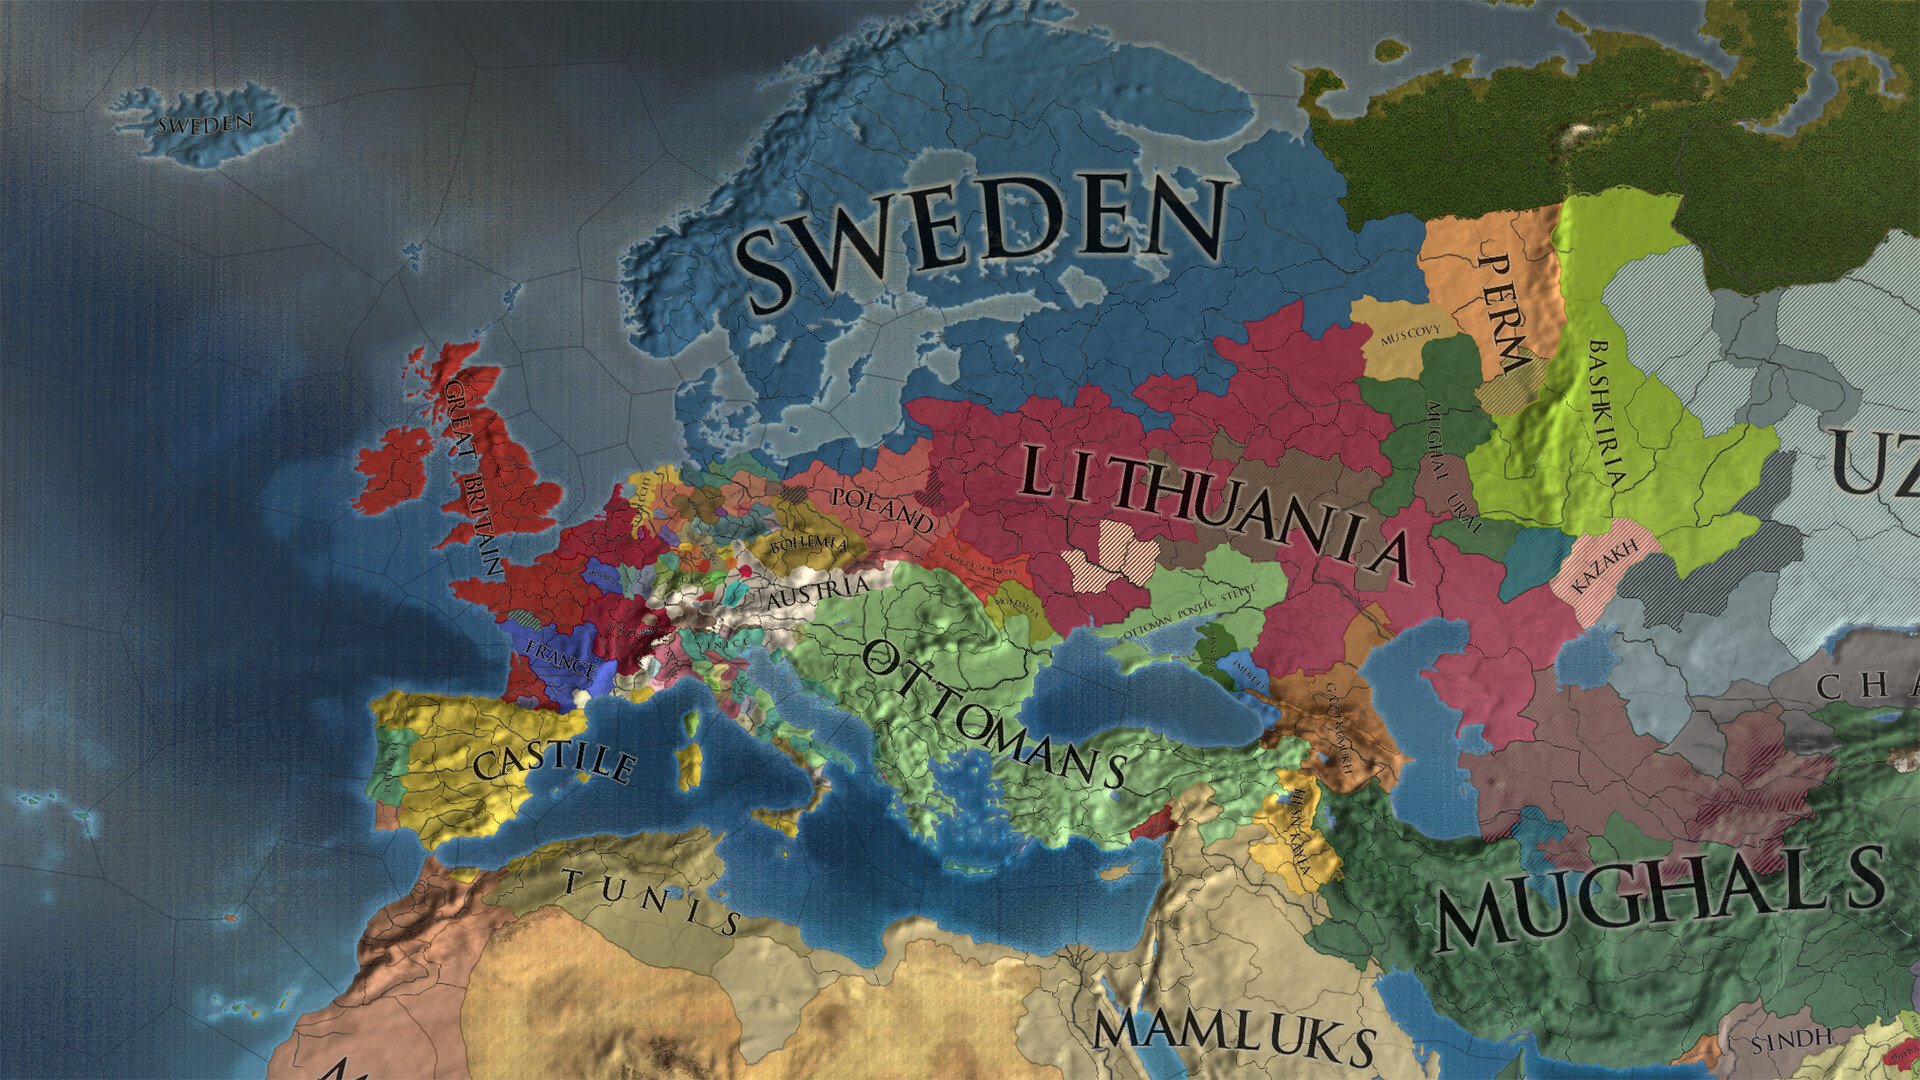 Europa Universalis IV Lions of the North 1